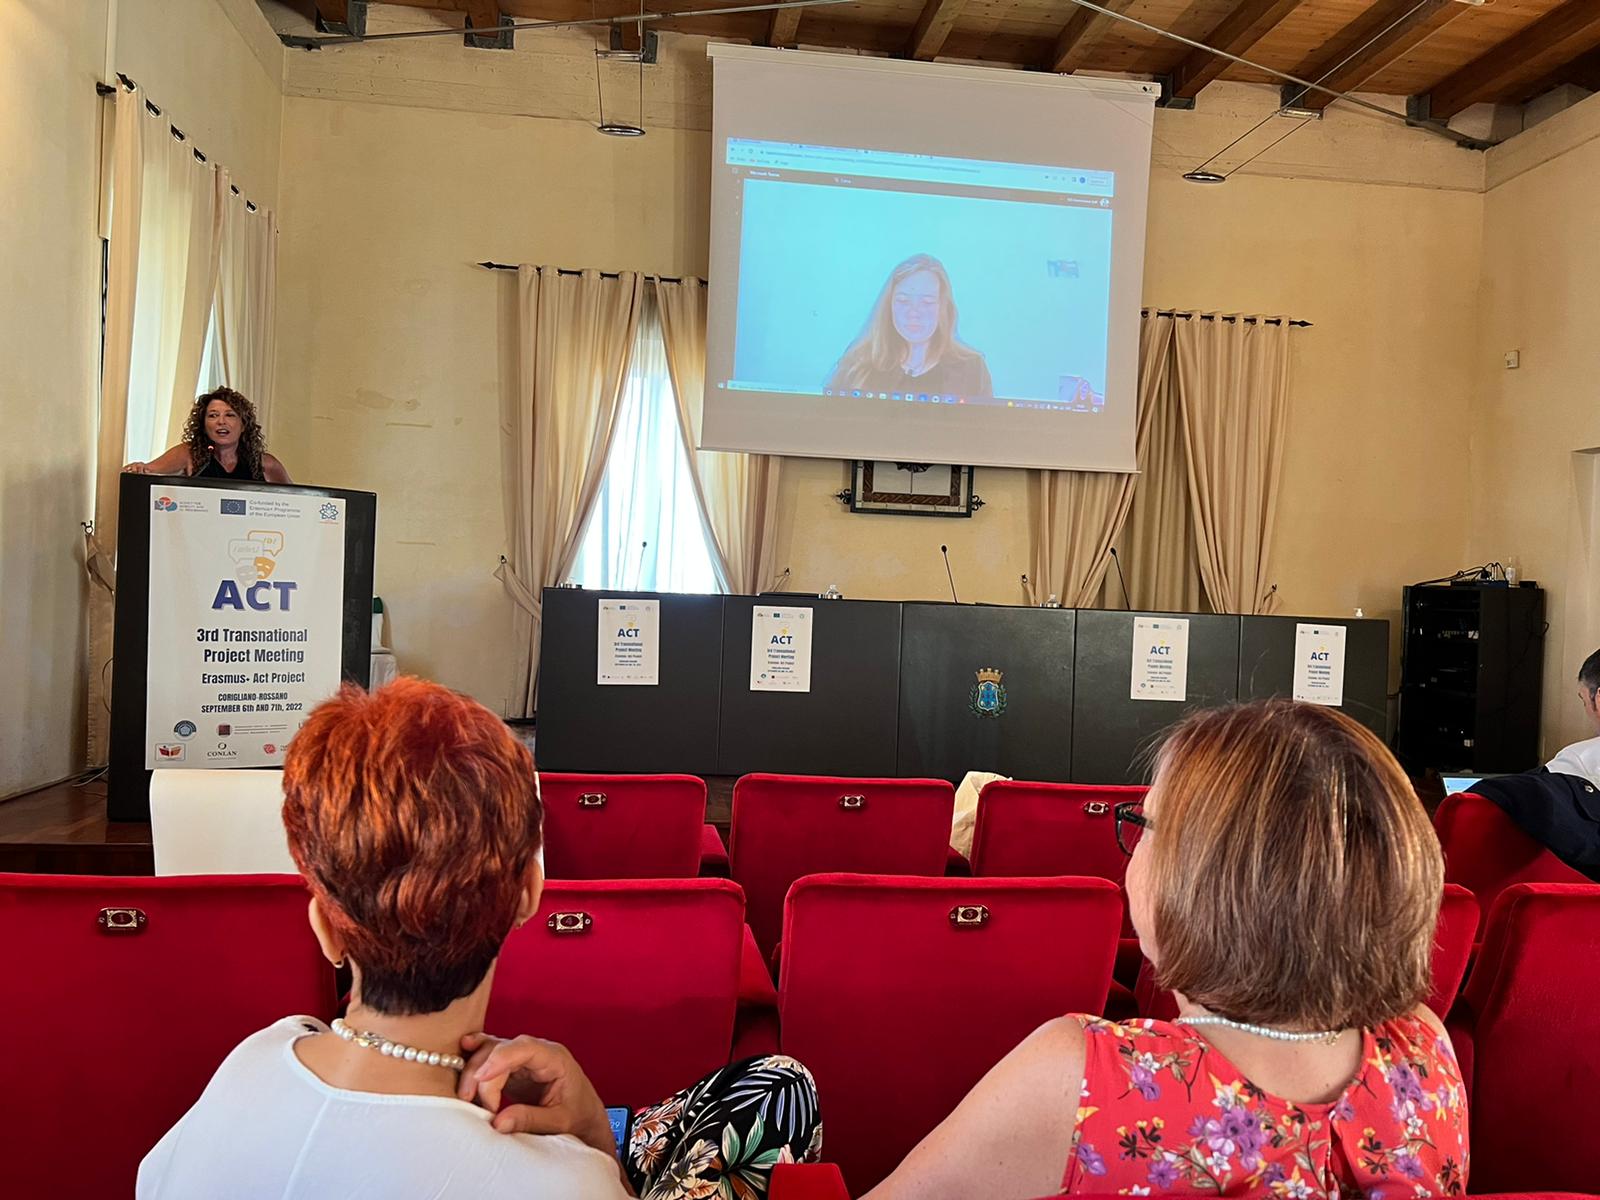 3RD TPM - ACT: ACT Communicate Transcend Project's 3rd Transnational Project Meeting realized in Corrigliano-Rossano / Italy 